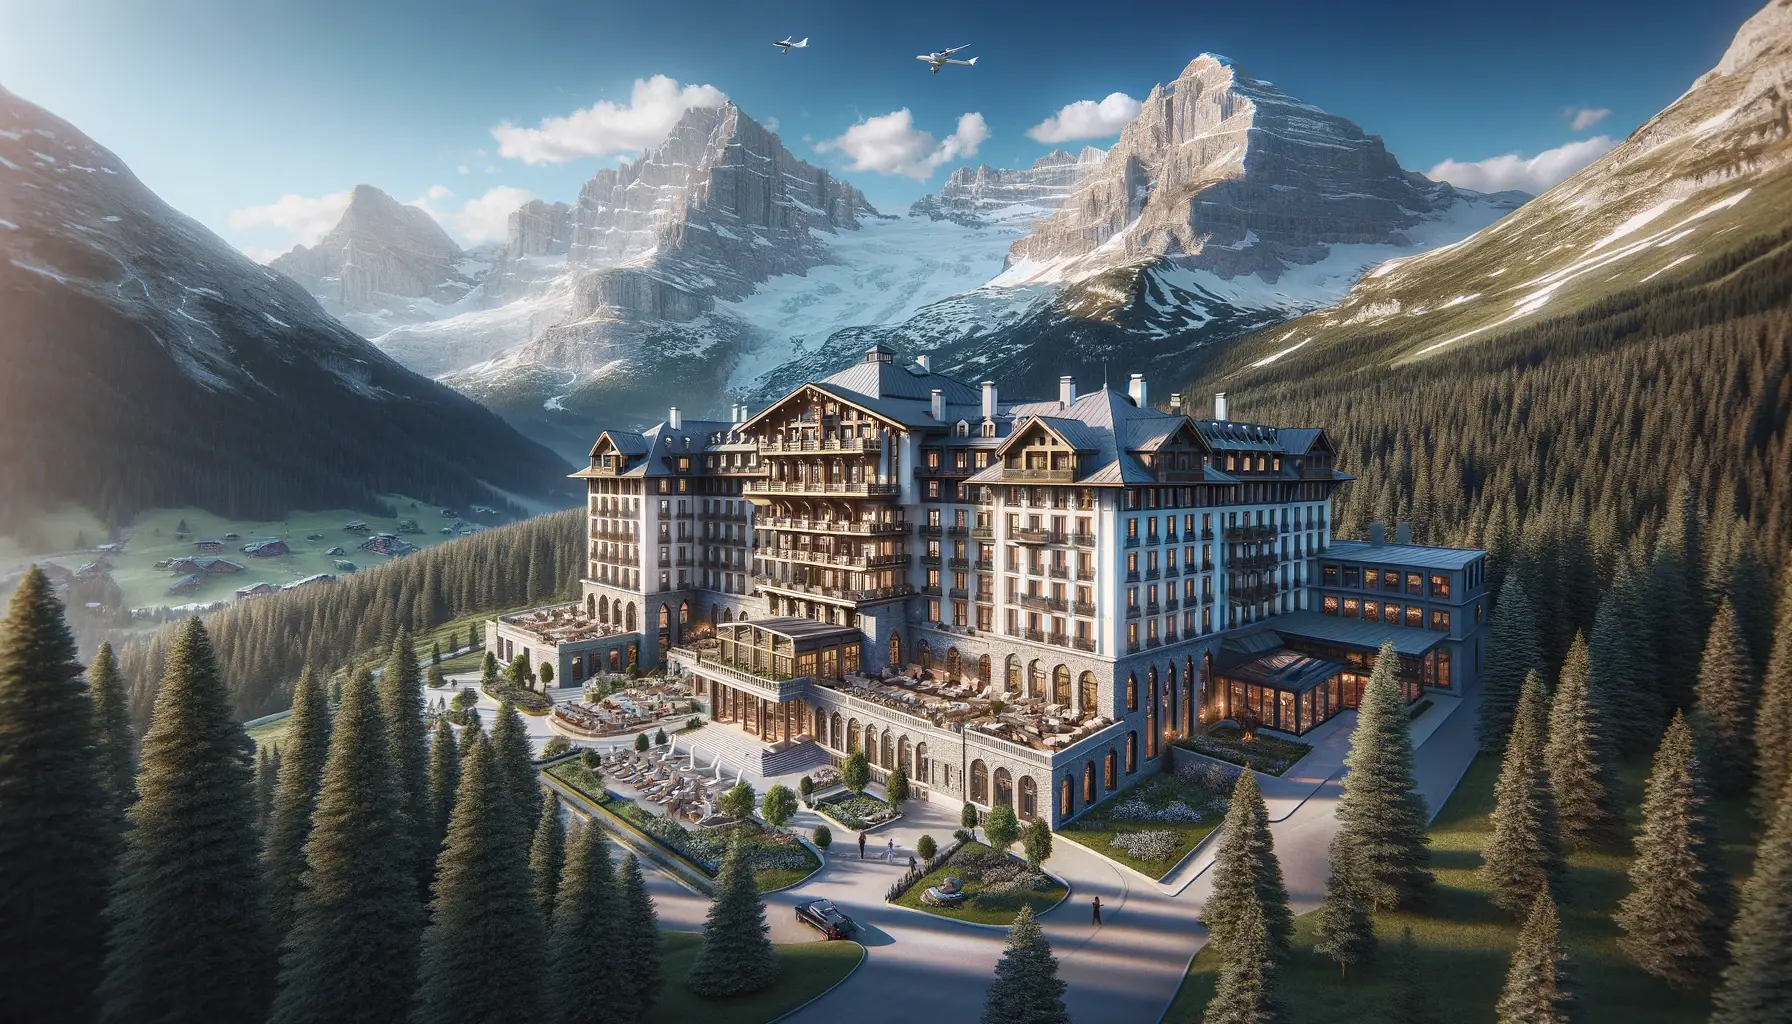 Grand hotel in a mountain setting.